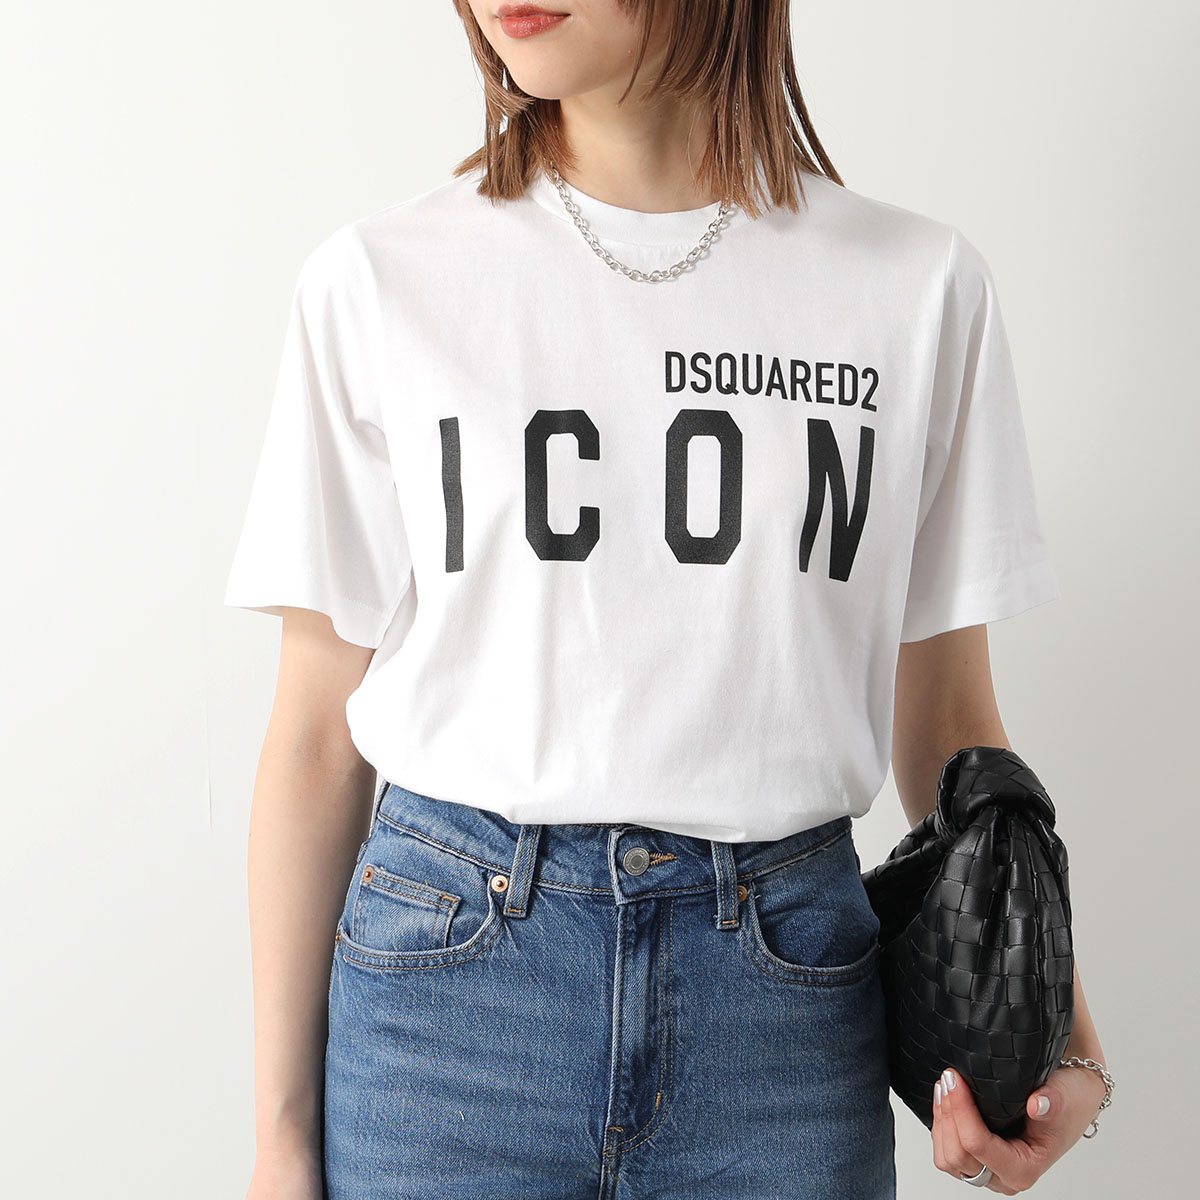 DSQUARED2 ディースクエアード Tシャツ ICON FOREVER EASY TEE S80GC0056 S24668 レディース 半袖 カットソー ロゴT カラー2色｜s-musee｜02